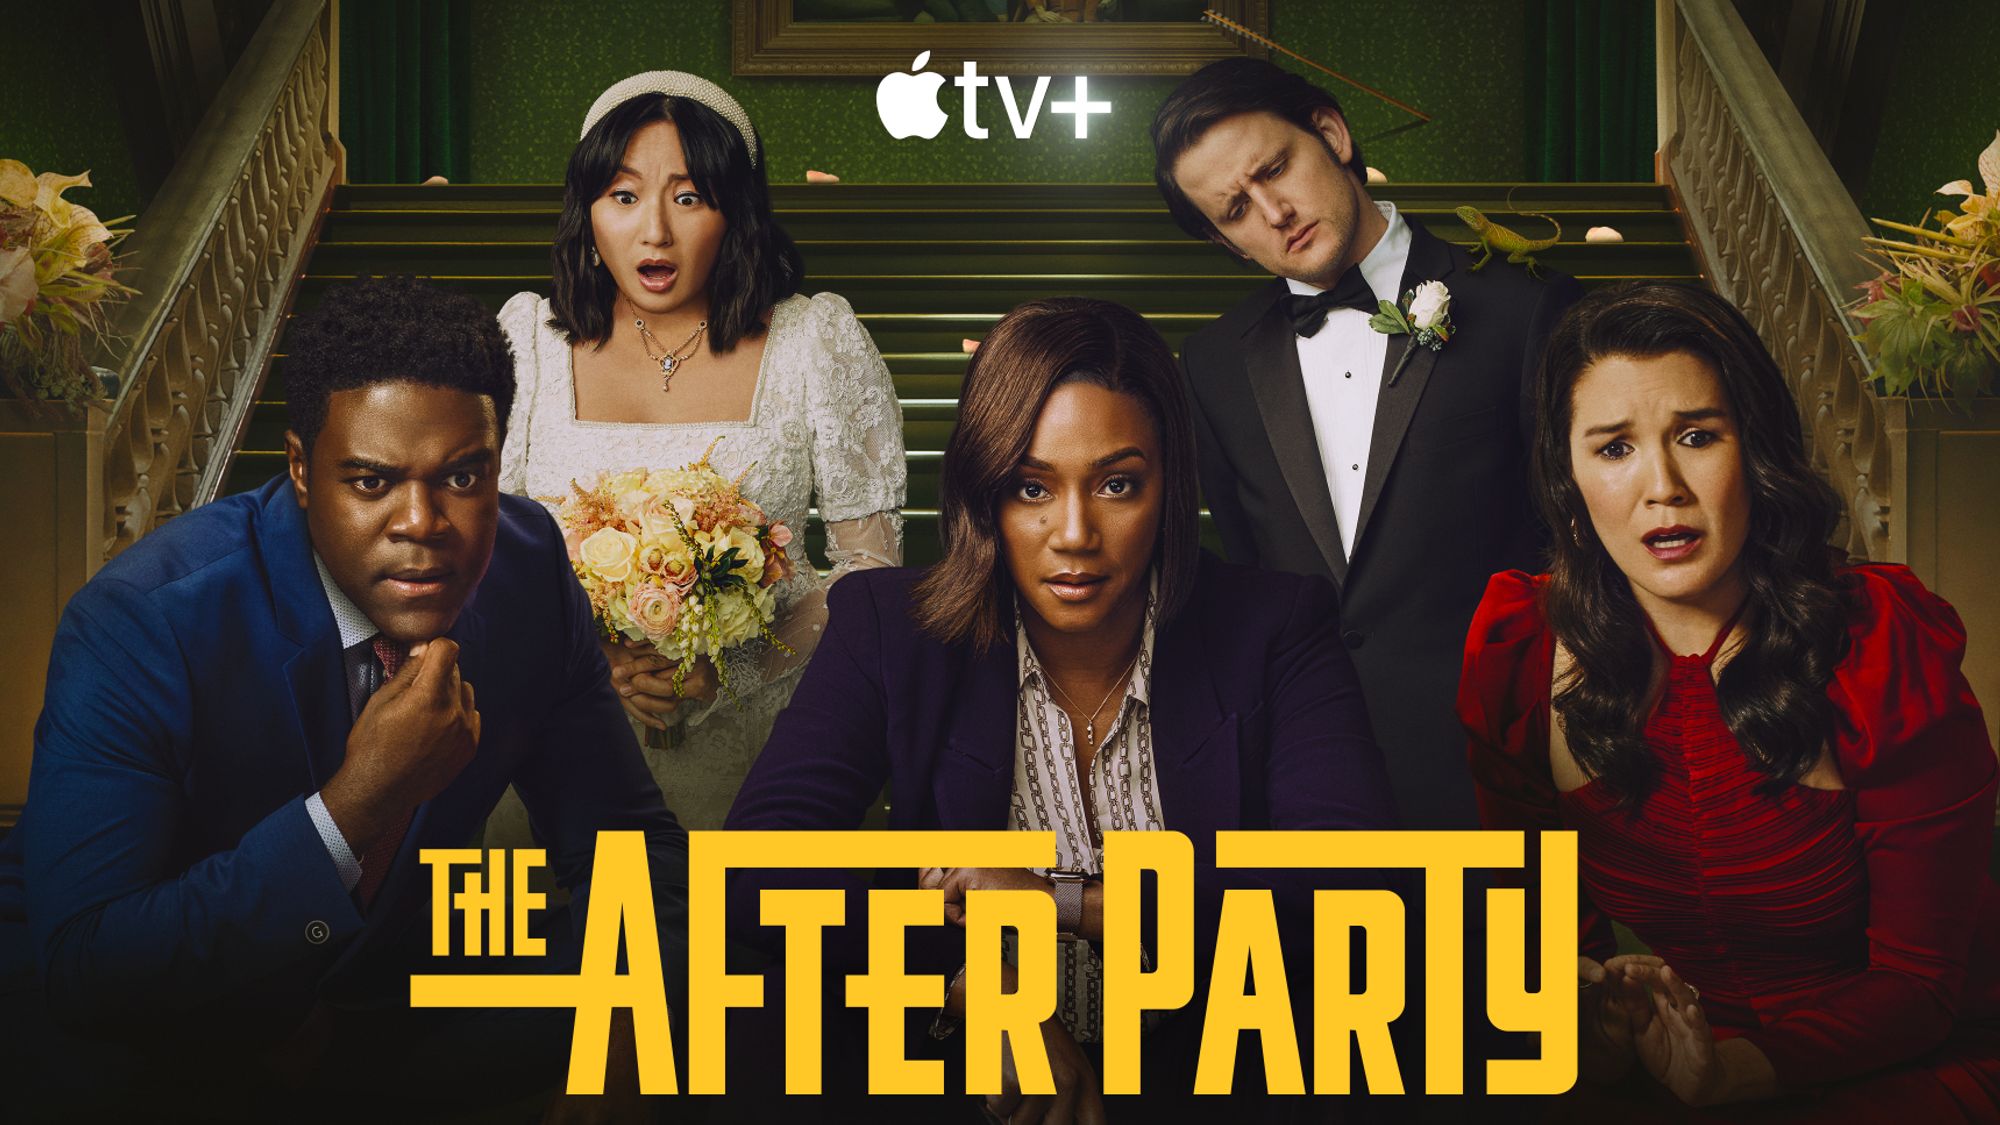 The Afterparty Season 2 Episode 3 Release Date